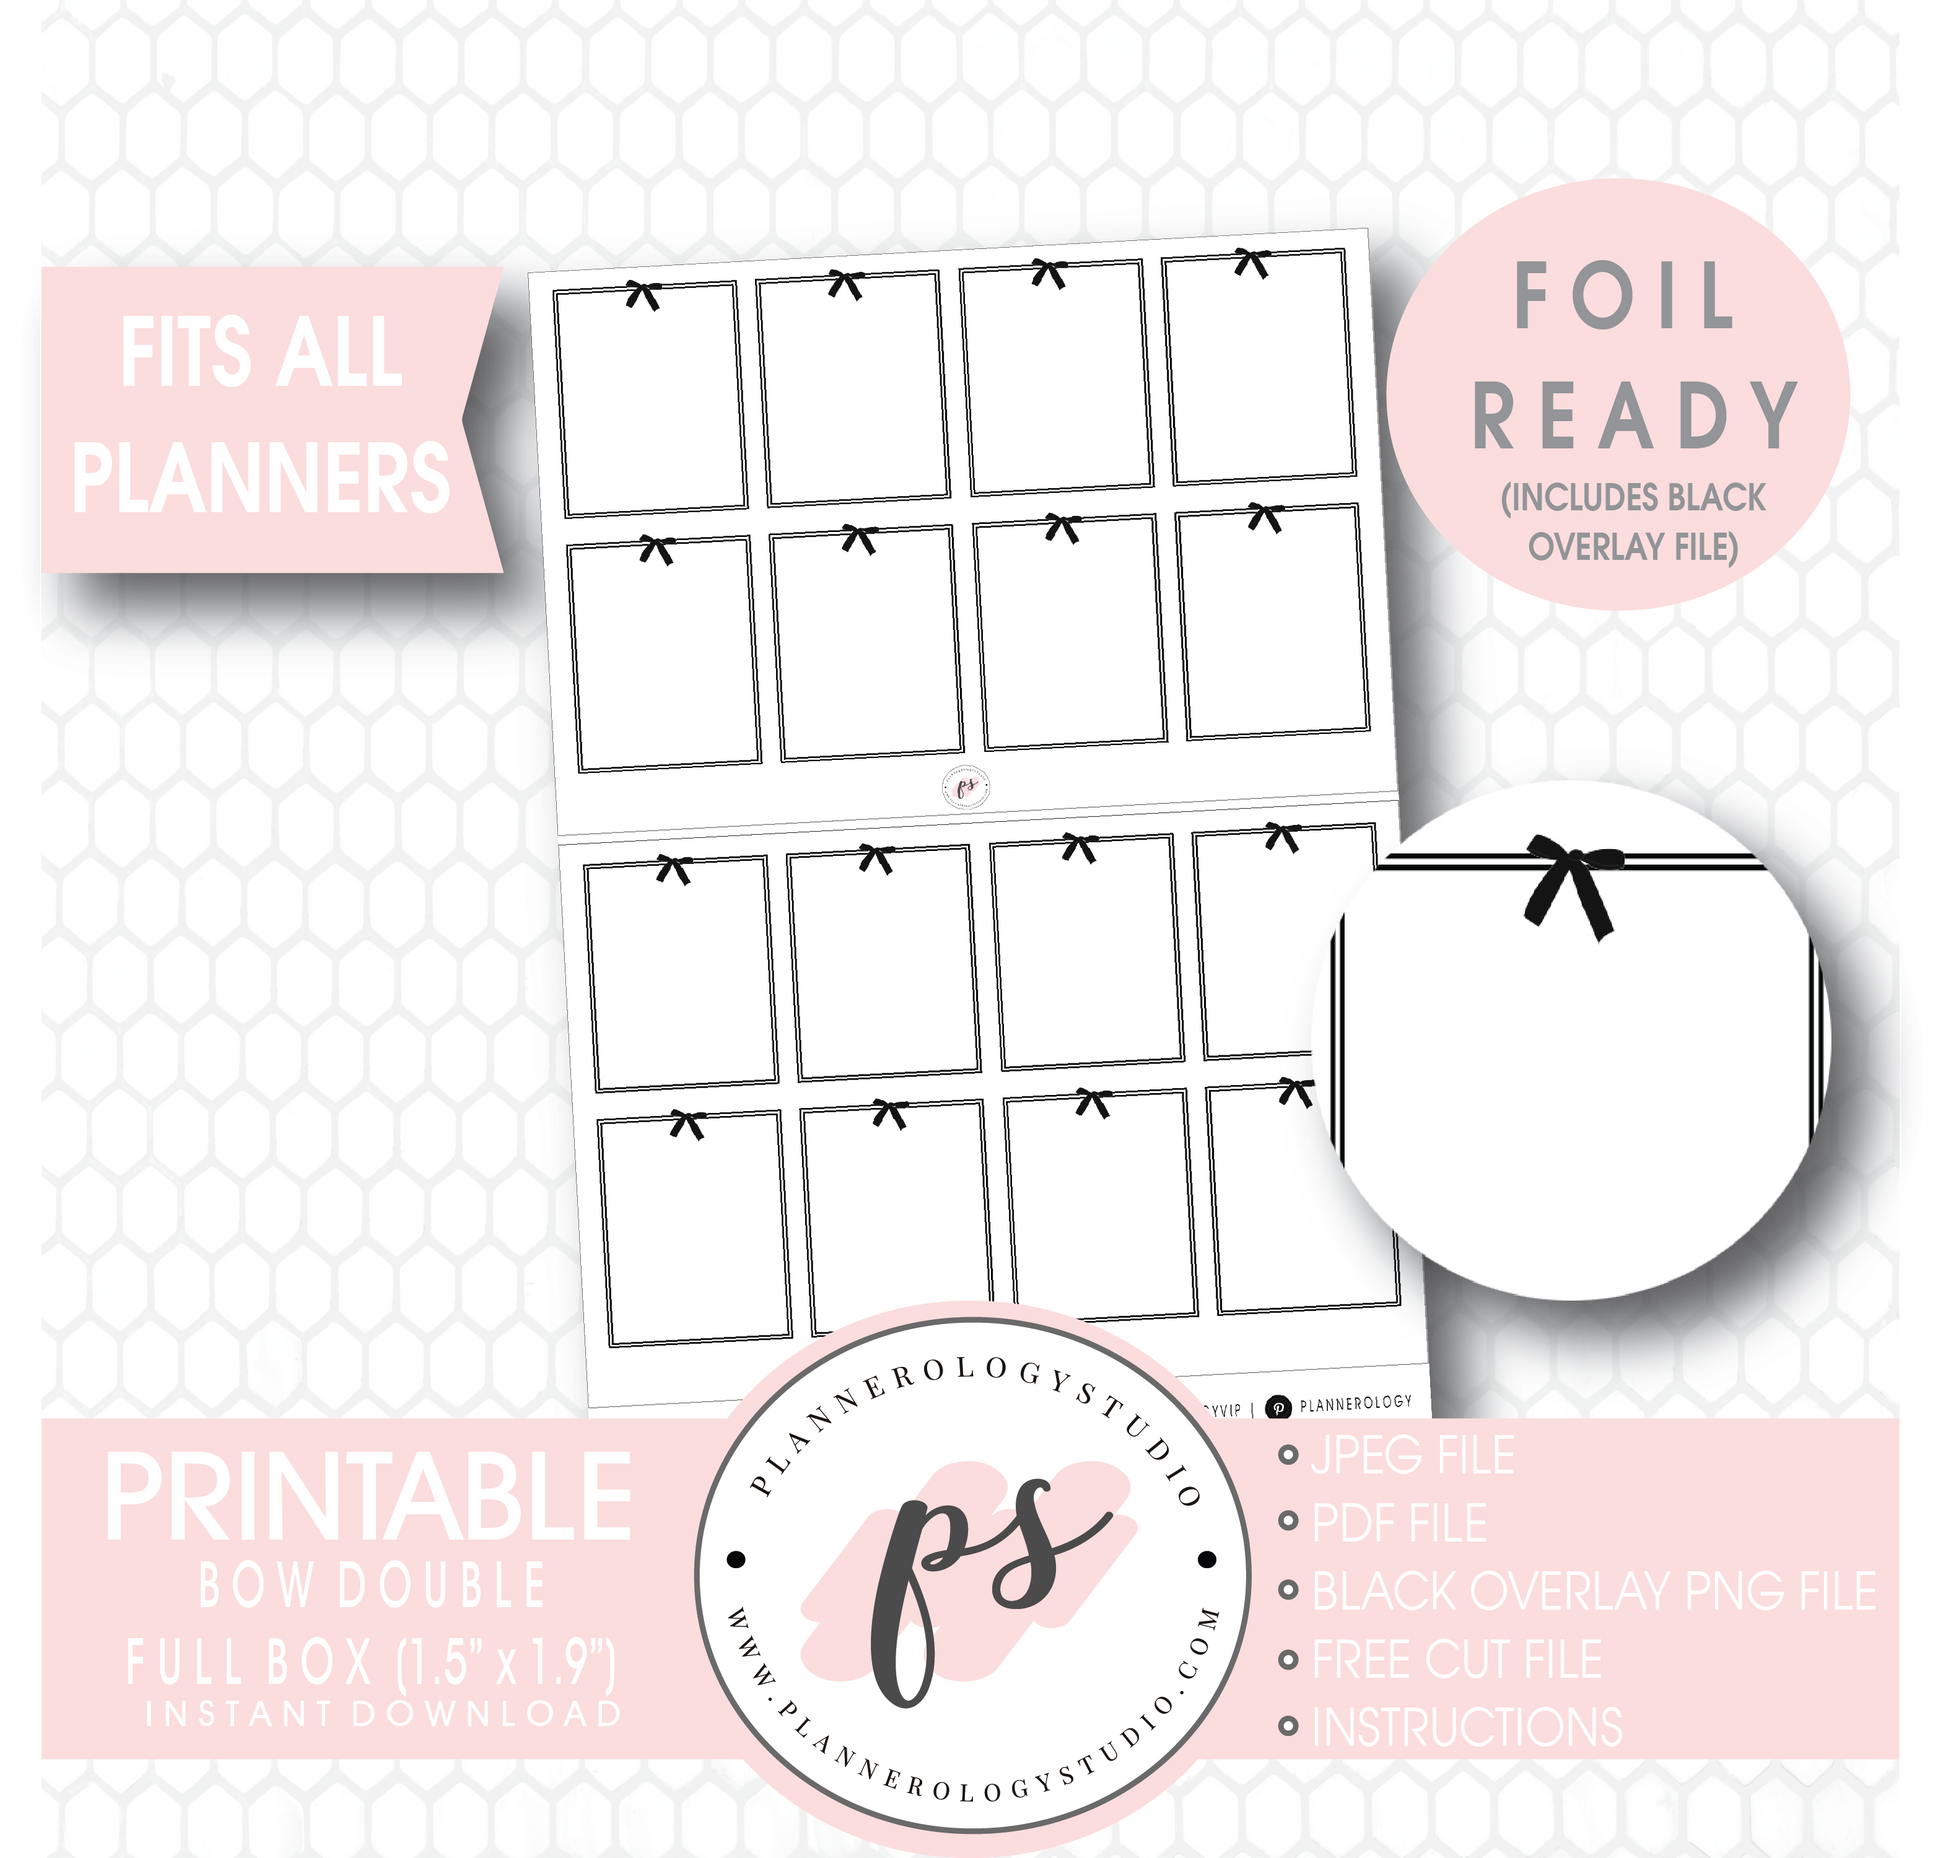 Decorative Bow Double Full Boxes Digital Printable Planner Stickers (Foil Ready) - Plannerologystudio